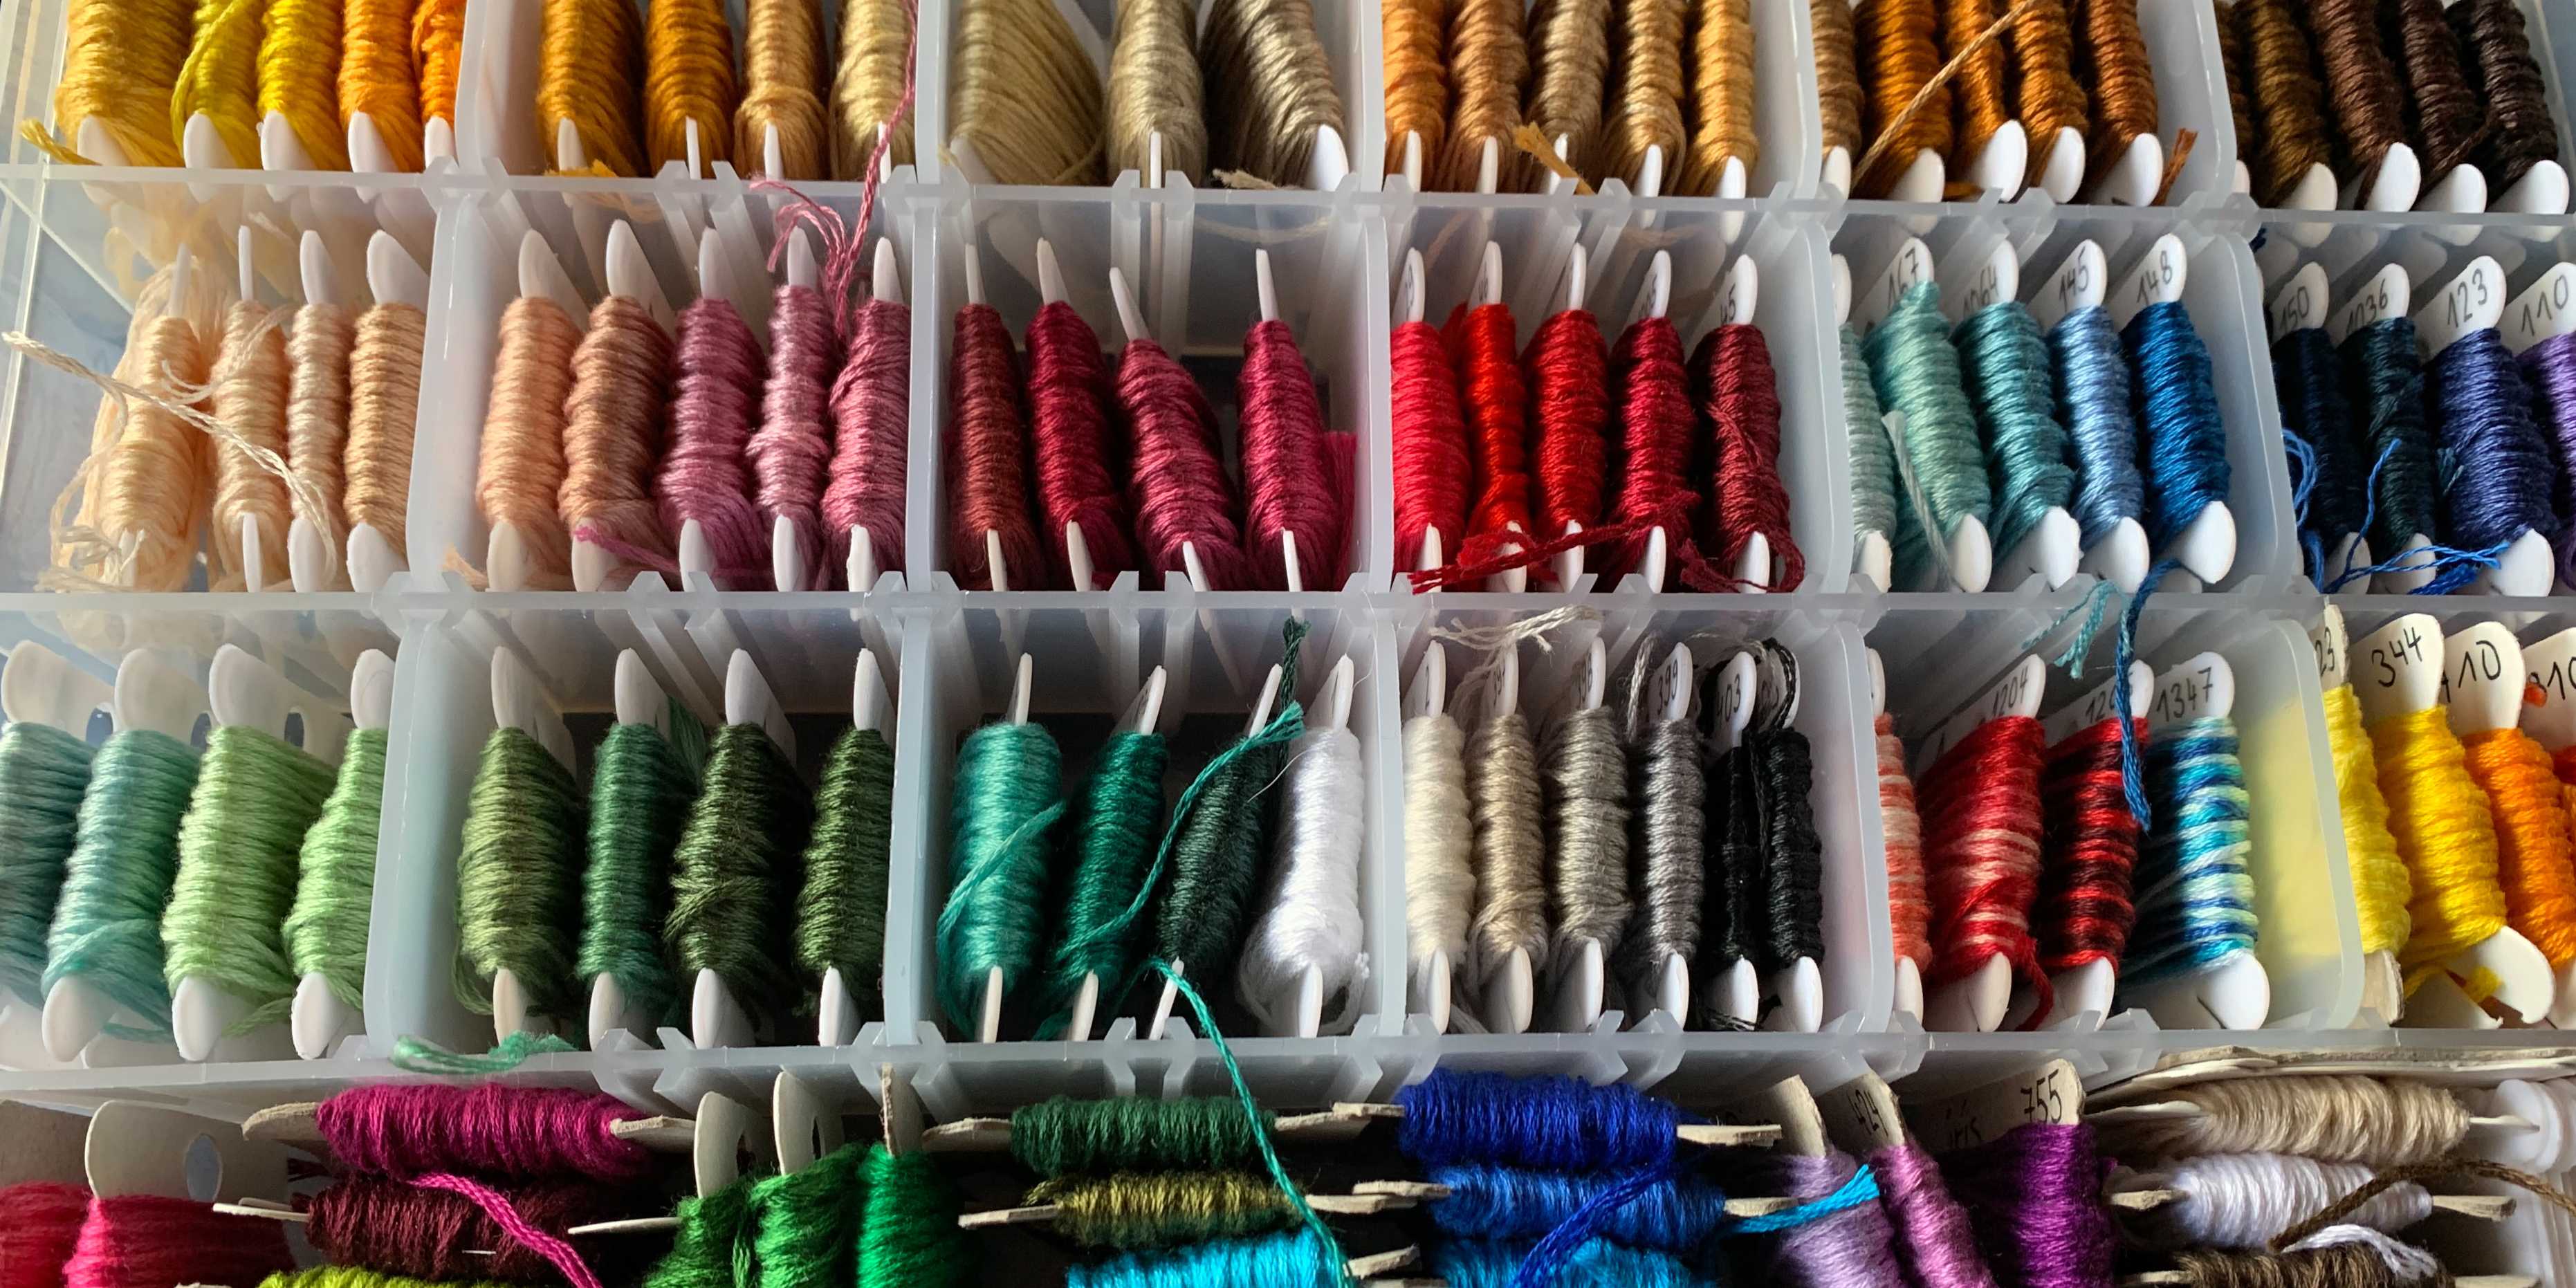 Marisas box with embroidery threads of various colors